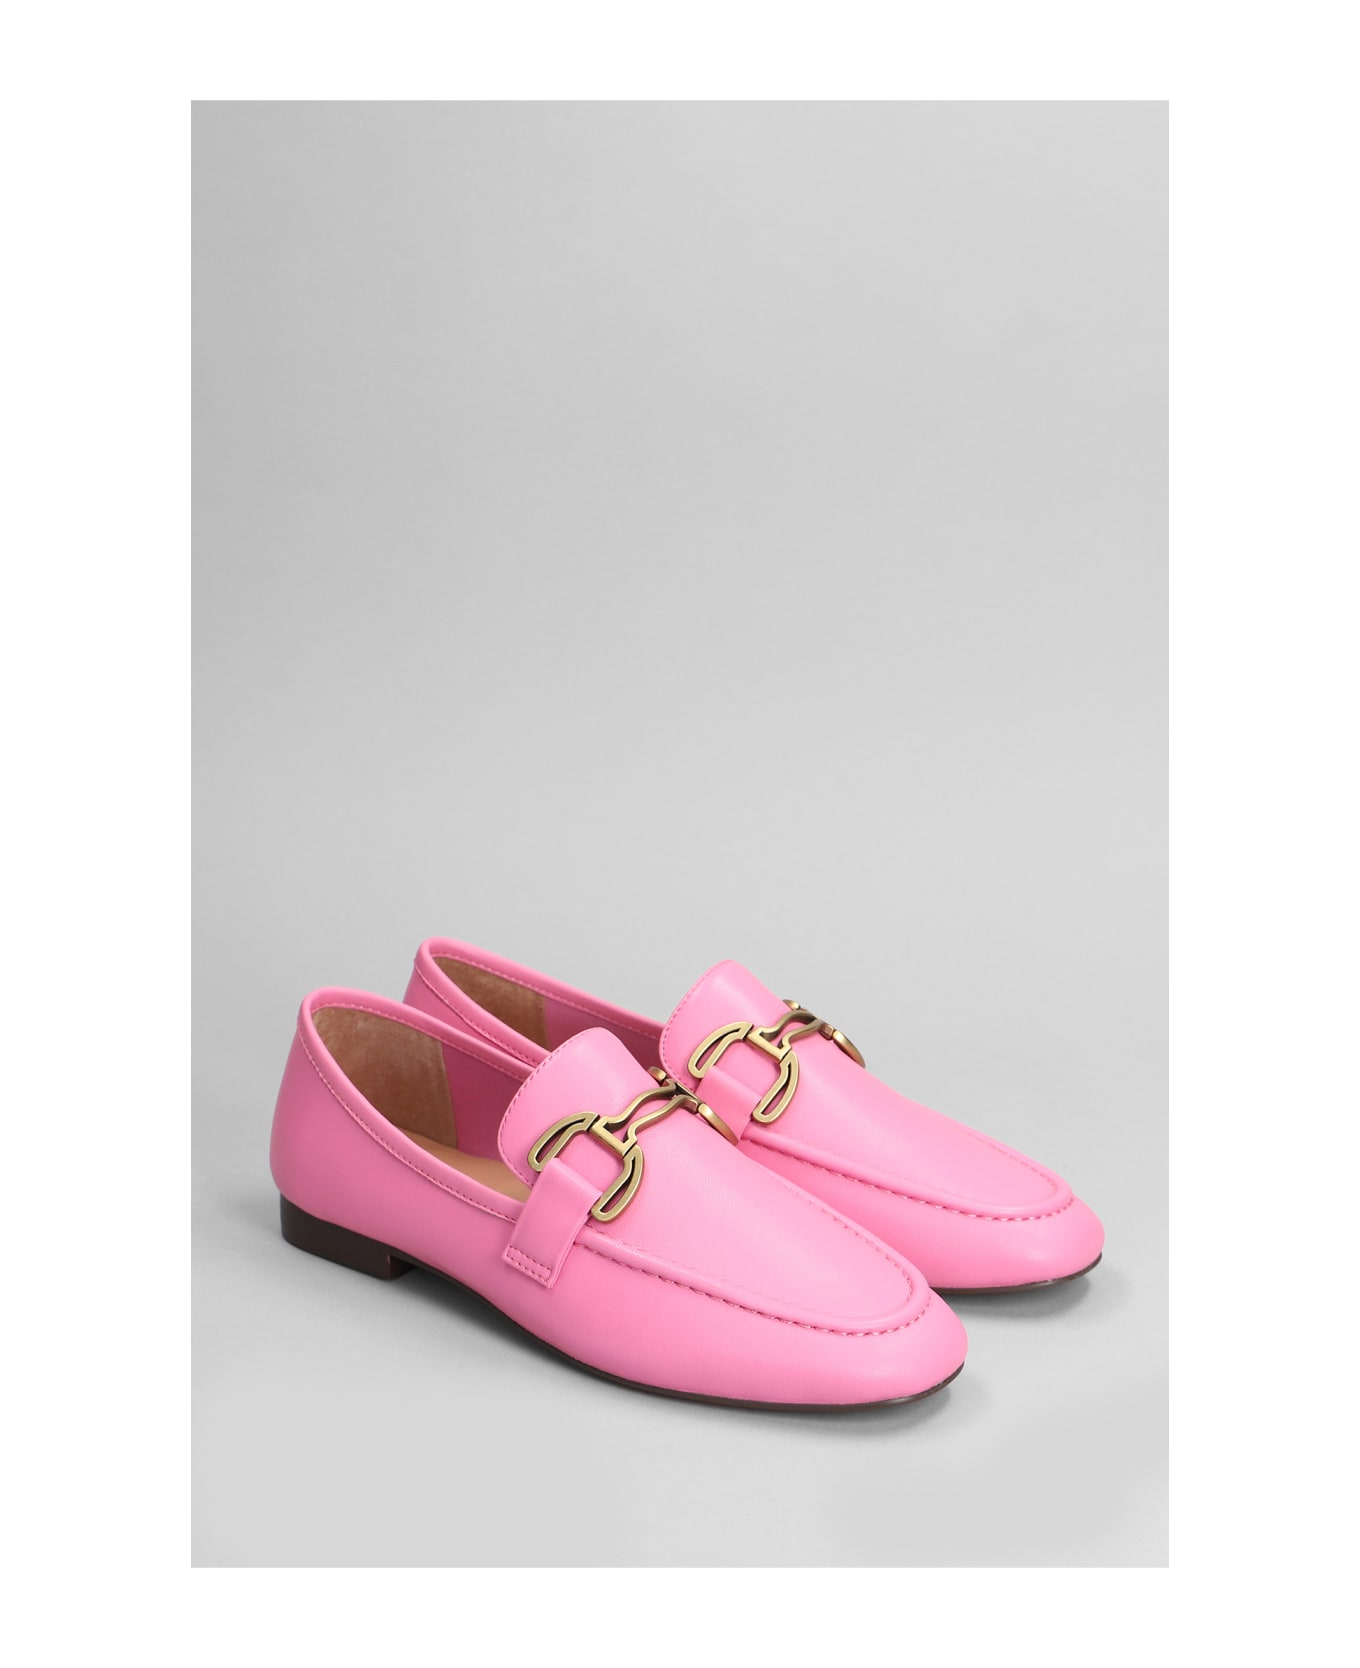 Bibi Lou Zagreb Ii Loafers In Rose-pink Leather - rose-pink